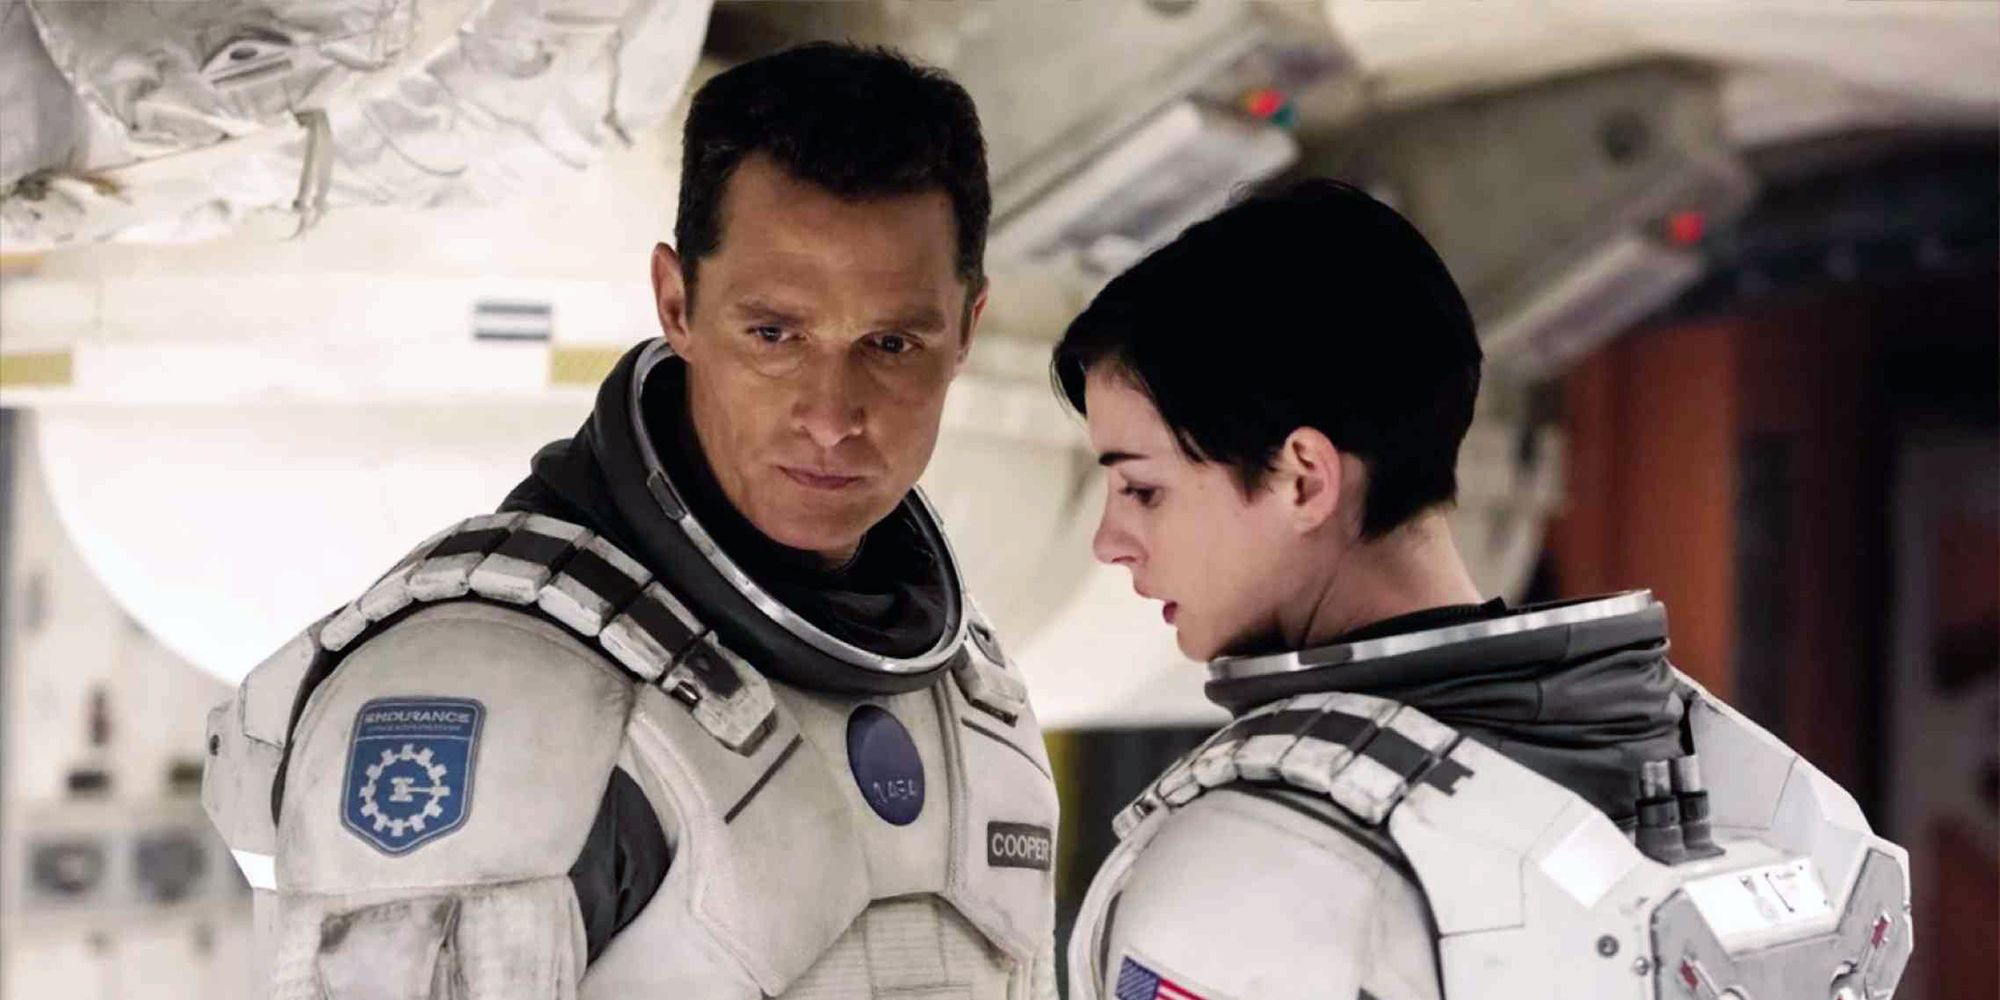 Joseph Cooper (Matthew McConaughey) and Amelia Brand (Anne Hathaway) standing in a spaceship in a spaceship and looking concerned in Interstellar